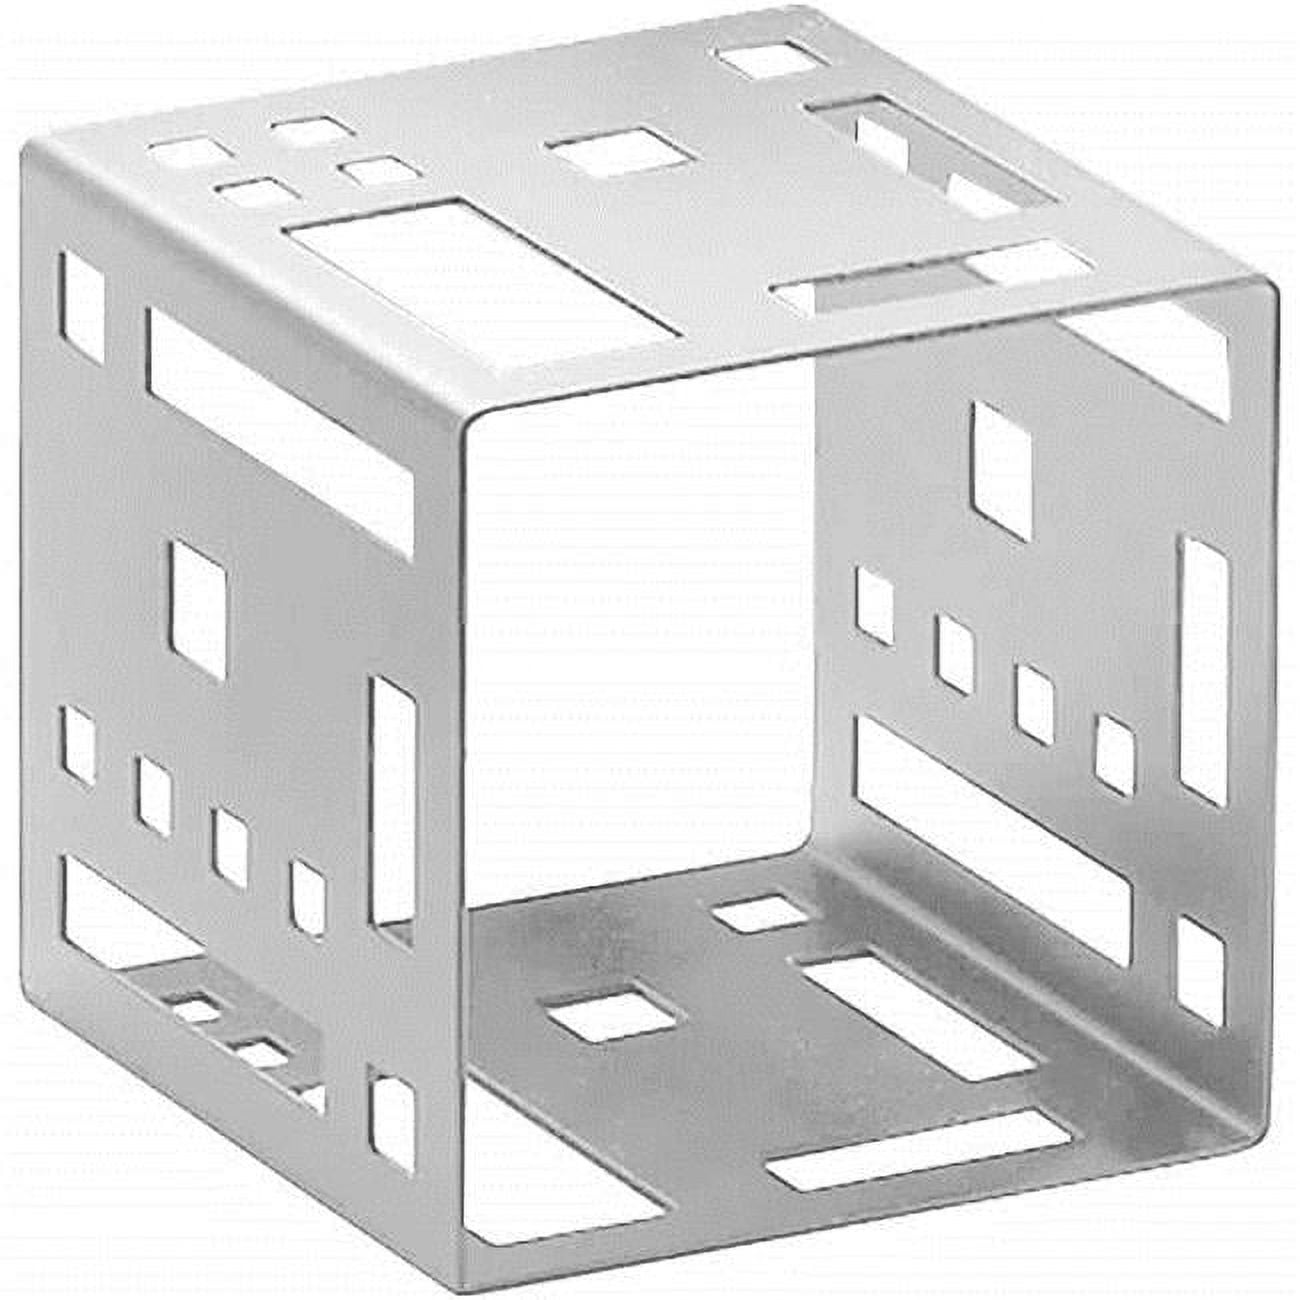 1607-9-55 Squared Stainless Steel Cube Riser - 9 X 9 X 9 In.